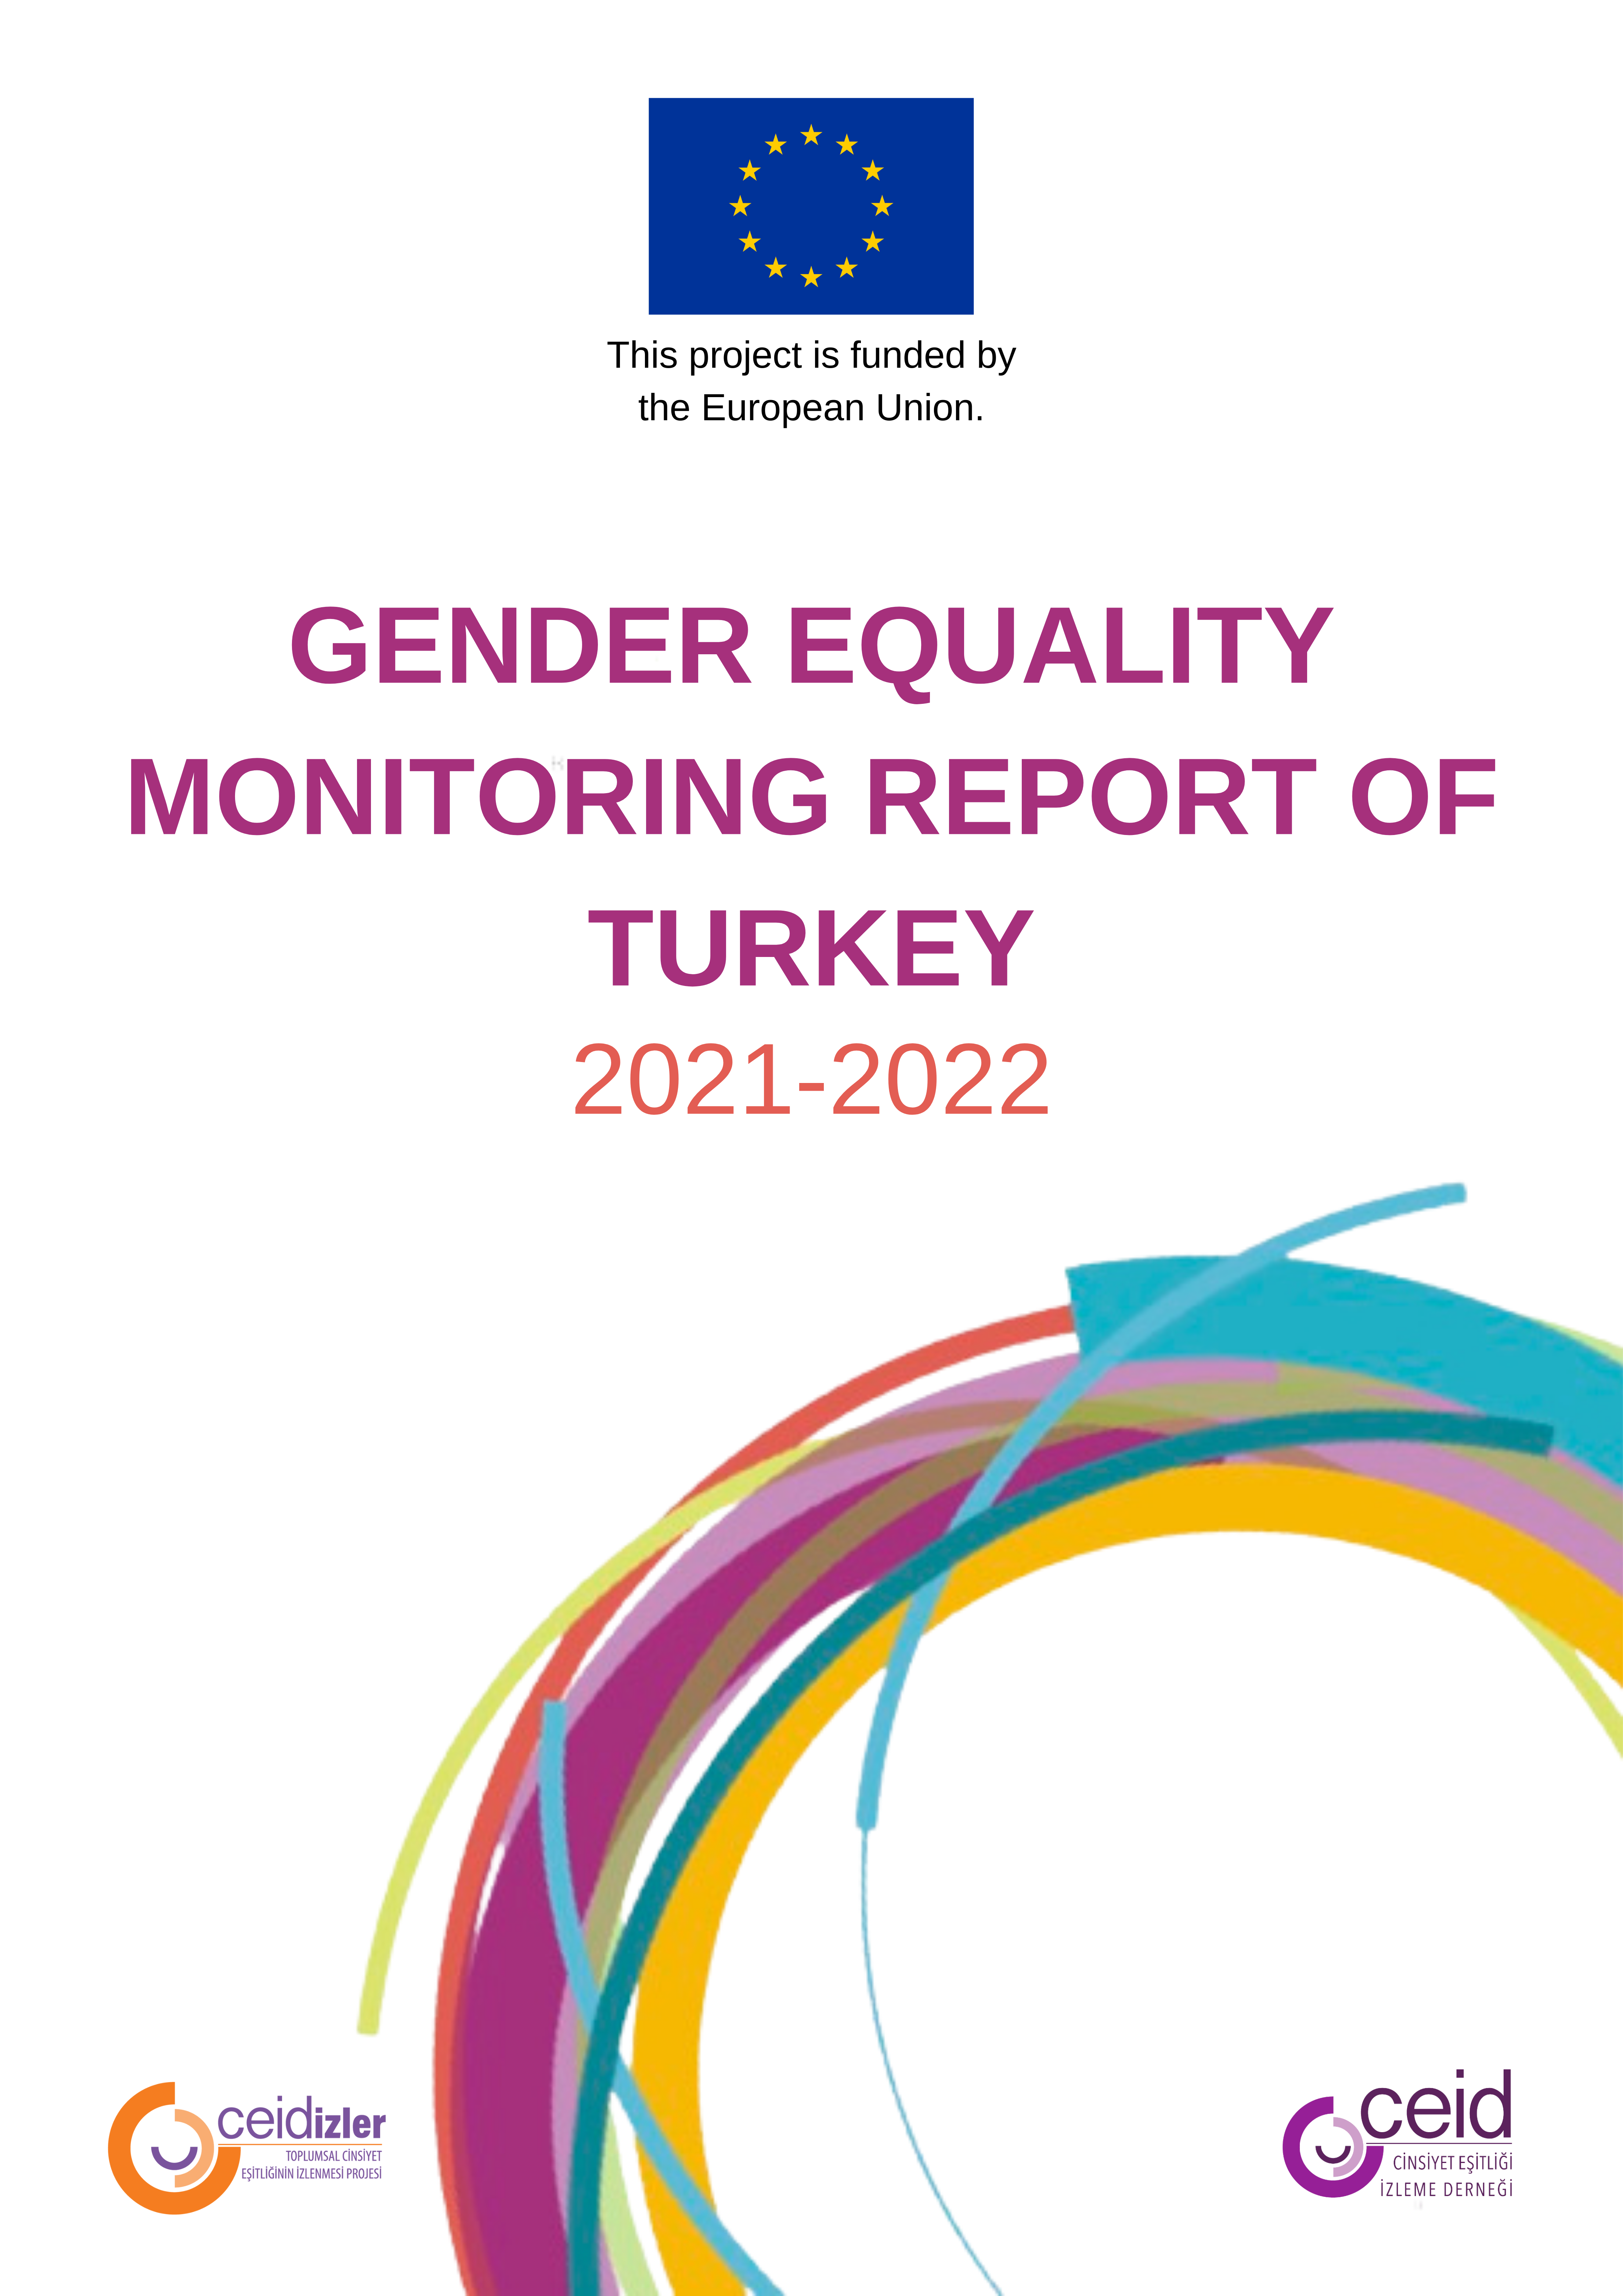 Gender Equality Monitoring Report of Turkey 2021-2022